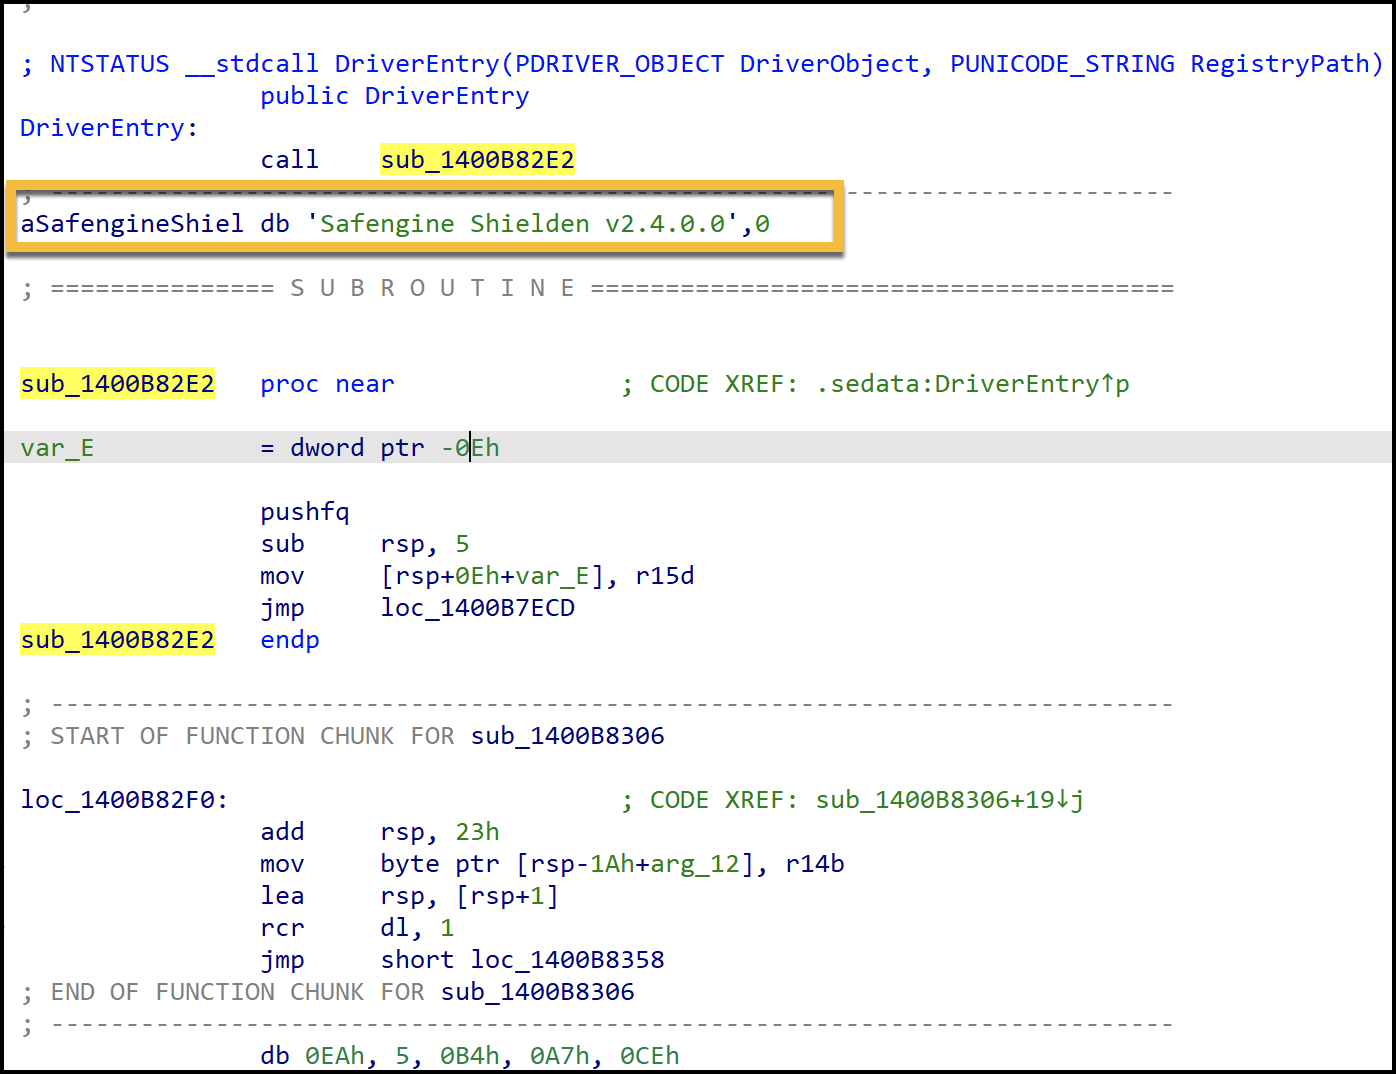 Image 11 is a screenshot of code. The driver is protected with Safengine Sheldon v2.0.0.